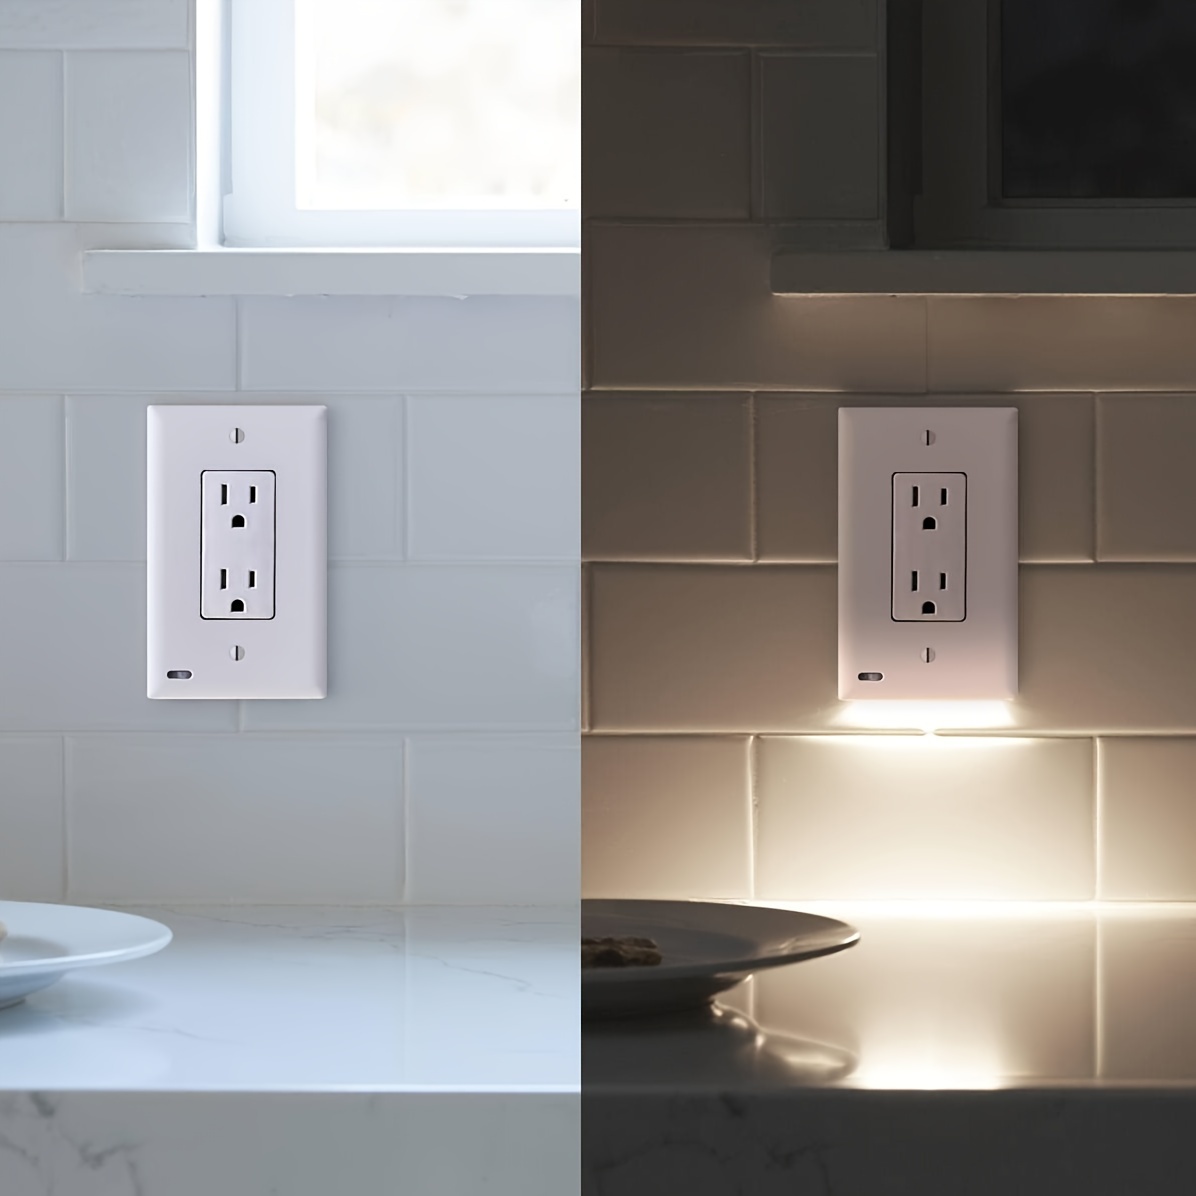 

3 Pack - Wall Plate Night Light - - Led Night Lights Built Into Electrical Outlet Wall Plates - Turn Nightlight On/off Automatically (3 Pack) (duplex Outlets, White)